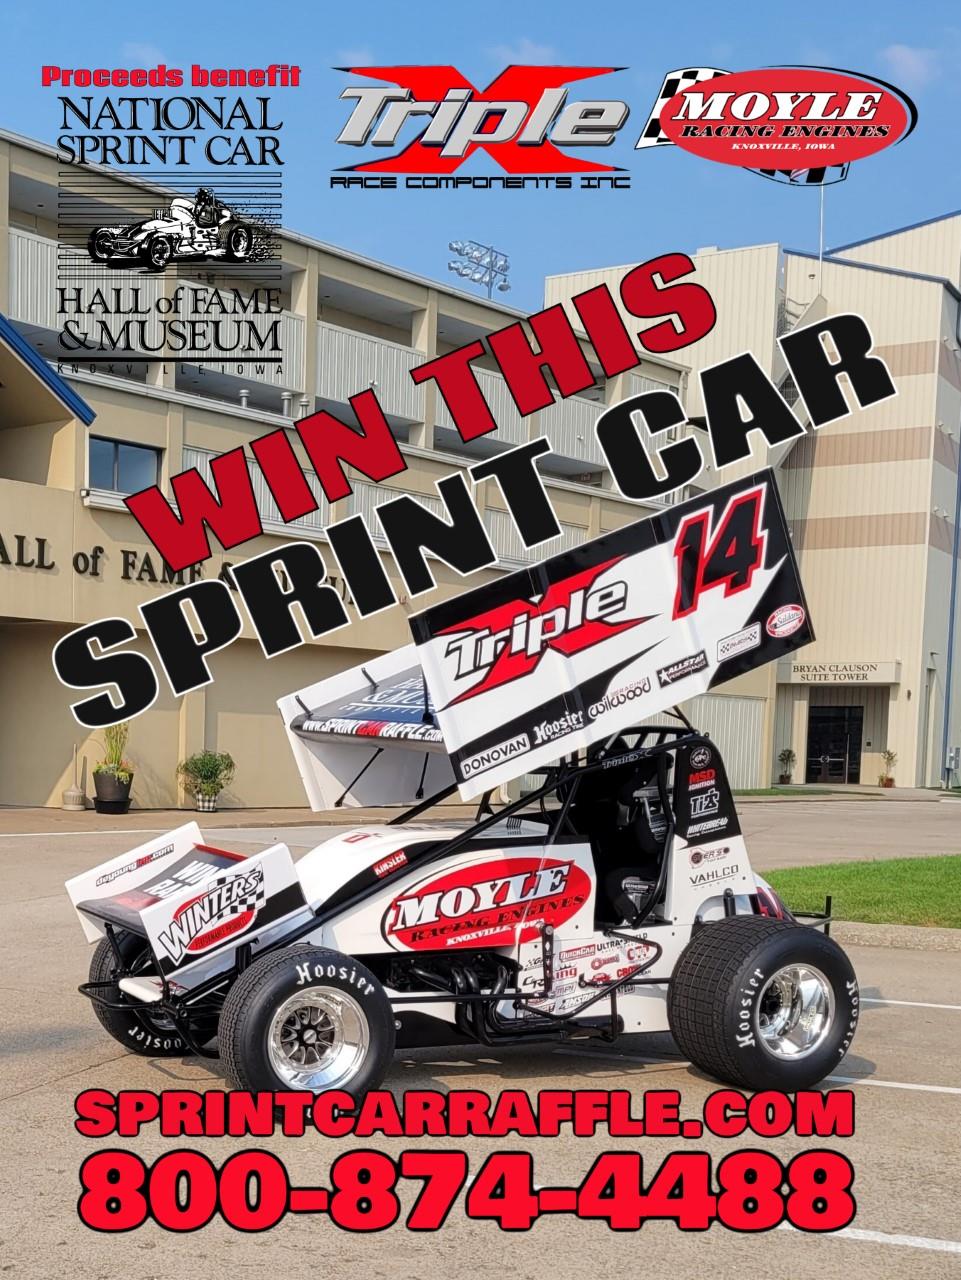 Triple X Chassis/Moyle Racing Engines Sprint Car Drawing Friday, December 16!